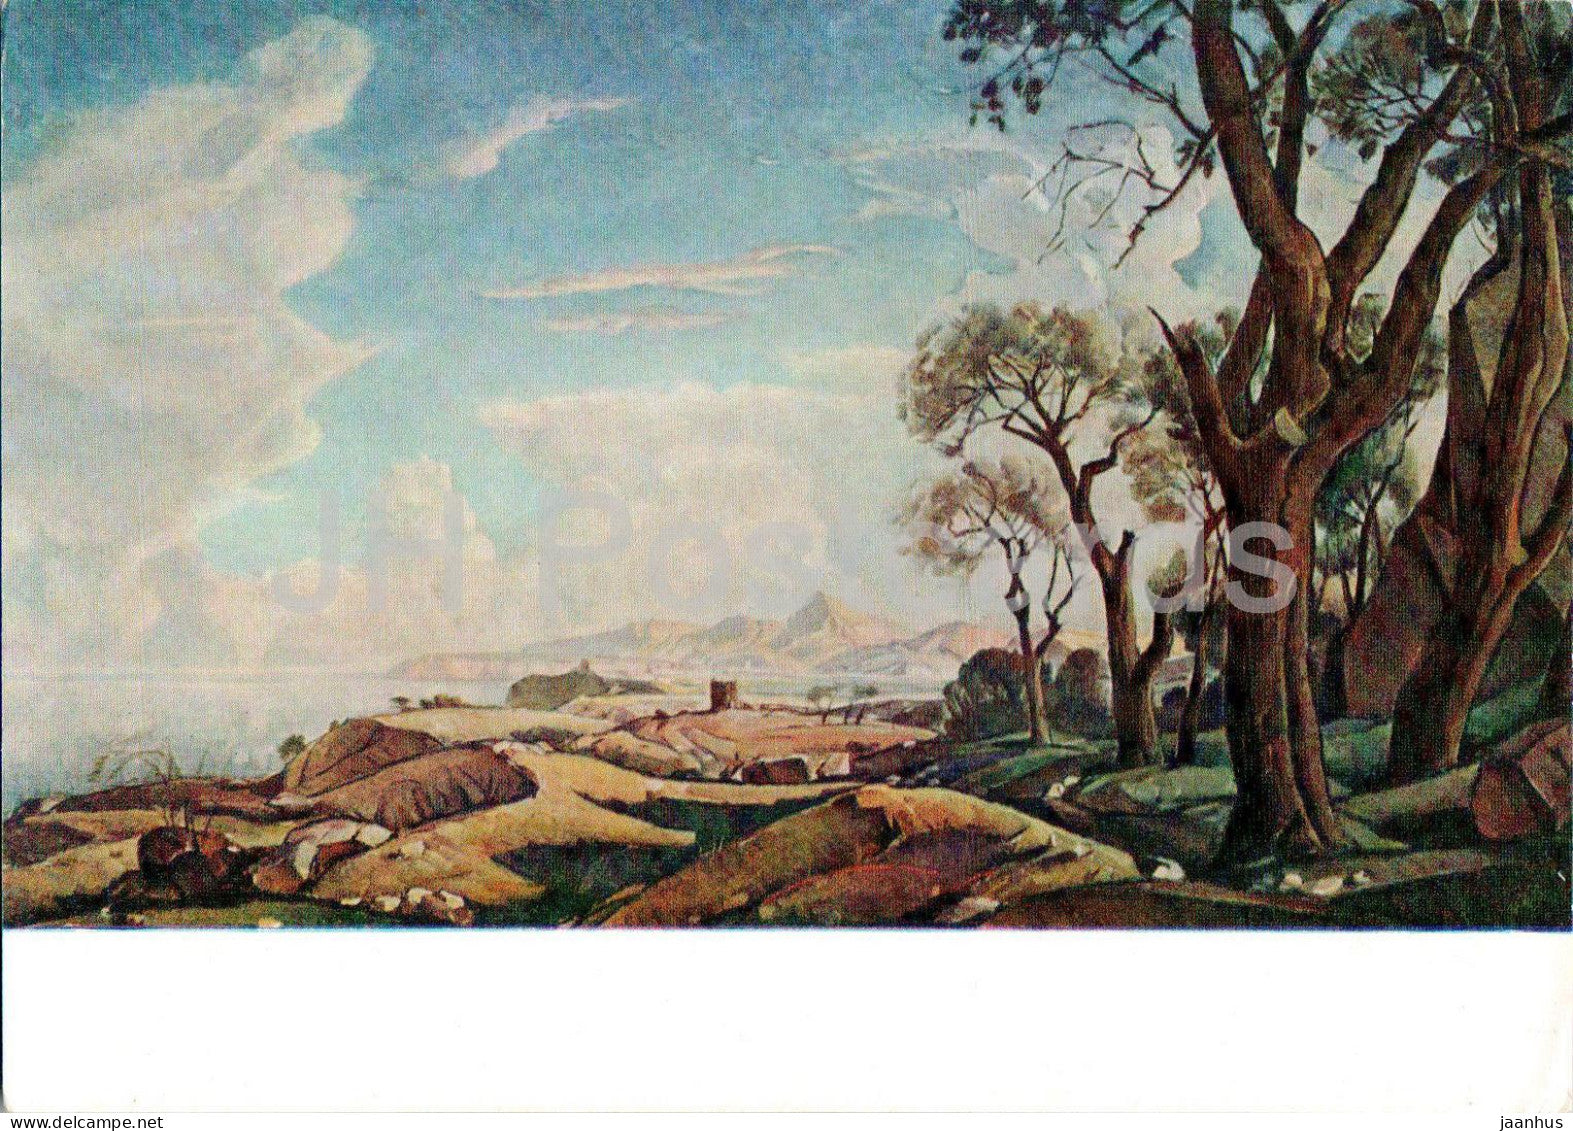 painting by K. Bogaevsky - Landscape with trees - Russian art - 1968 - Russia USSR - unused - JH Postcards